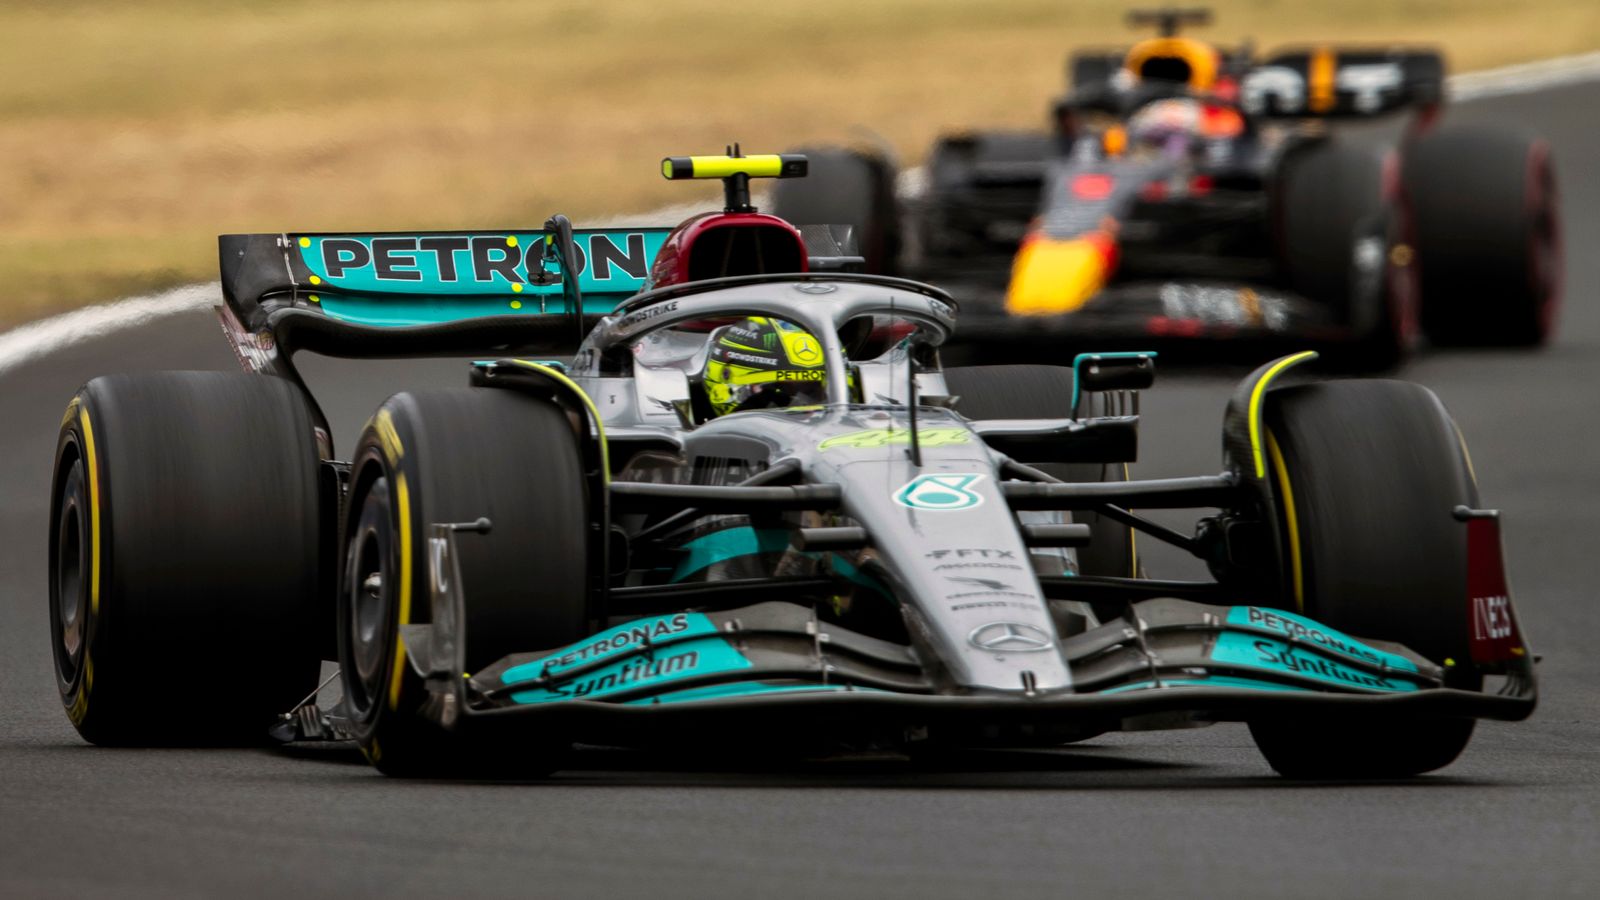 Mercedes: ‘Excited’ F1 world champions promise more to come in 2022 after upturn in form